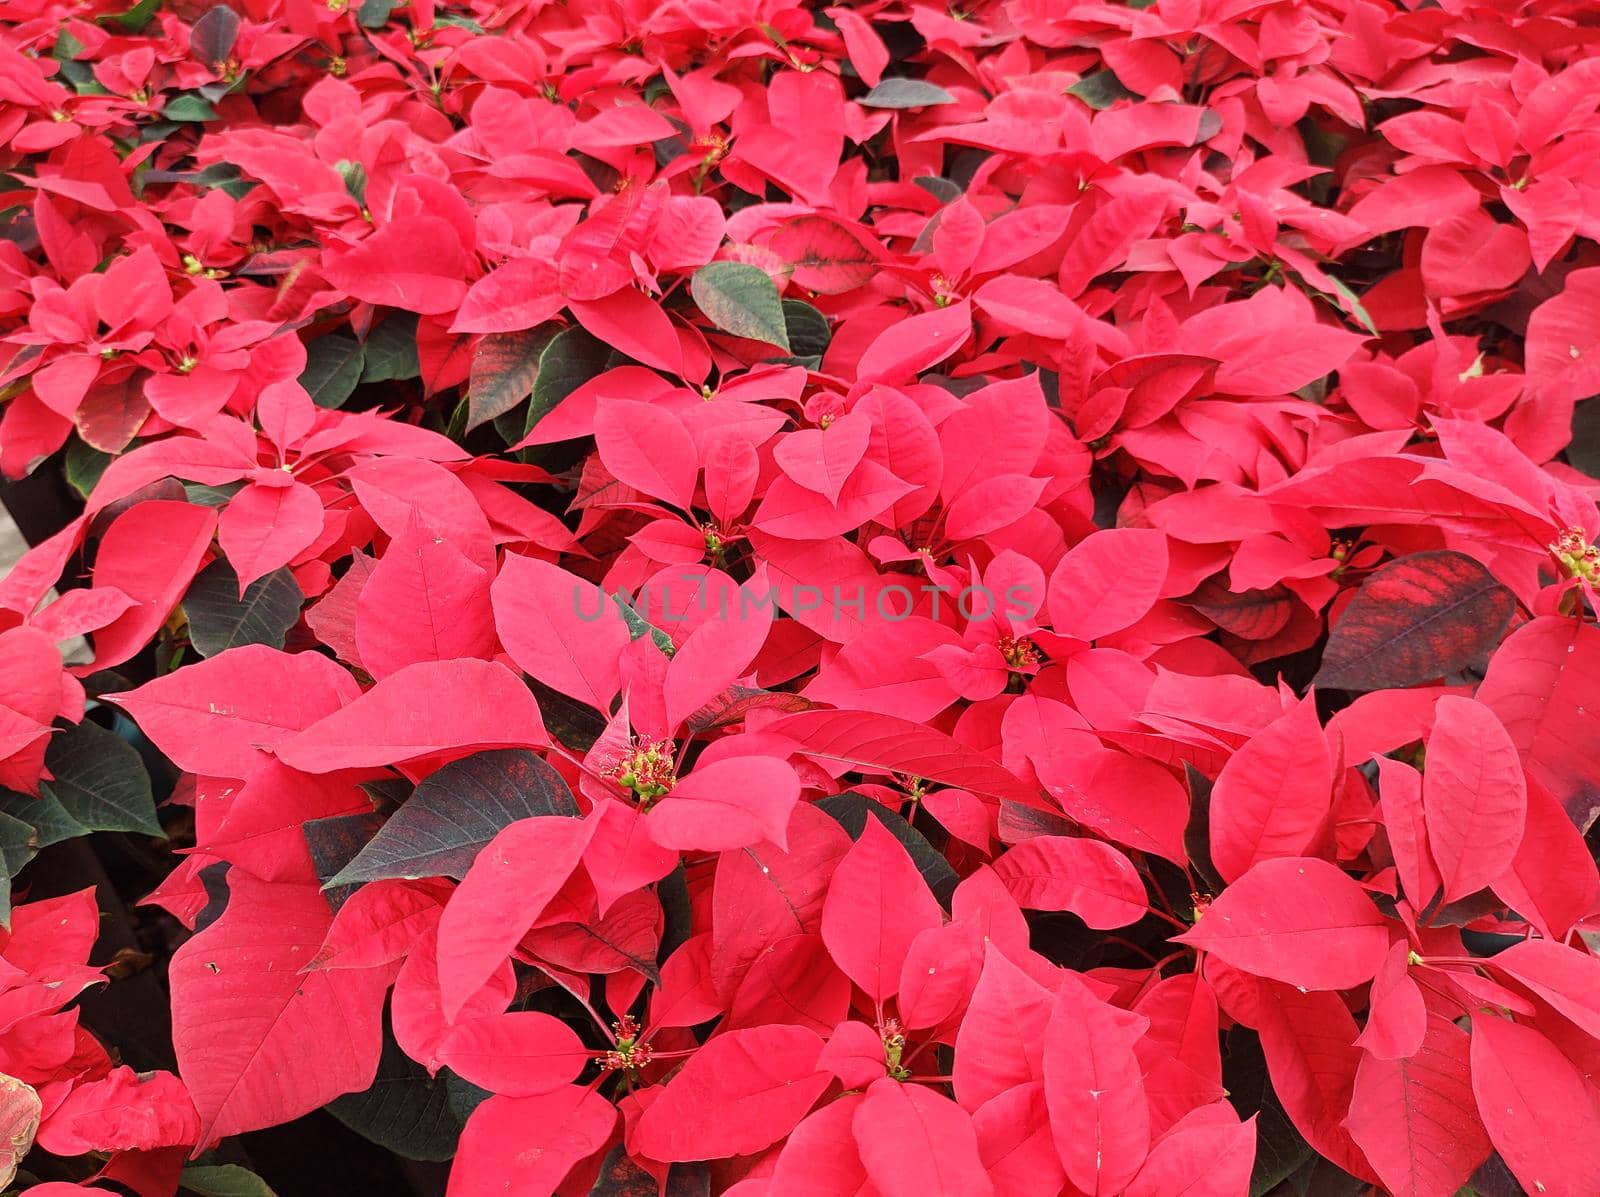 Garden bed lined with red poinsettias. by silviopl